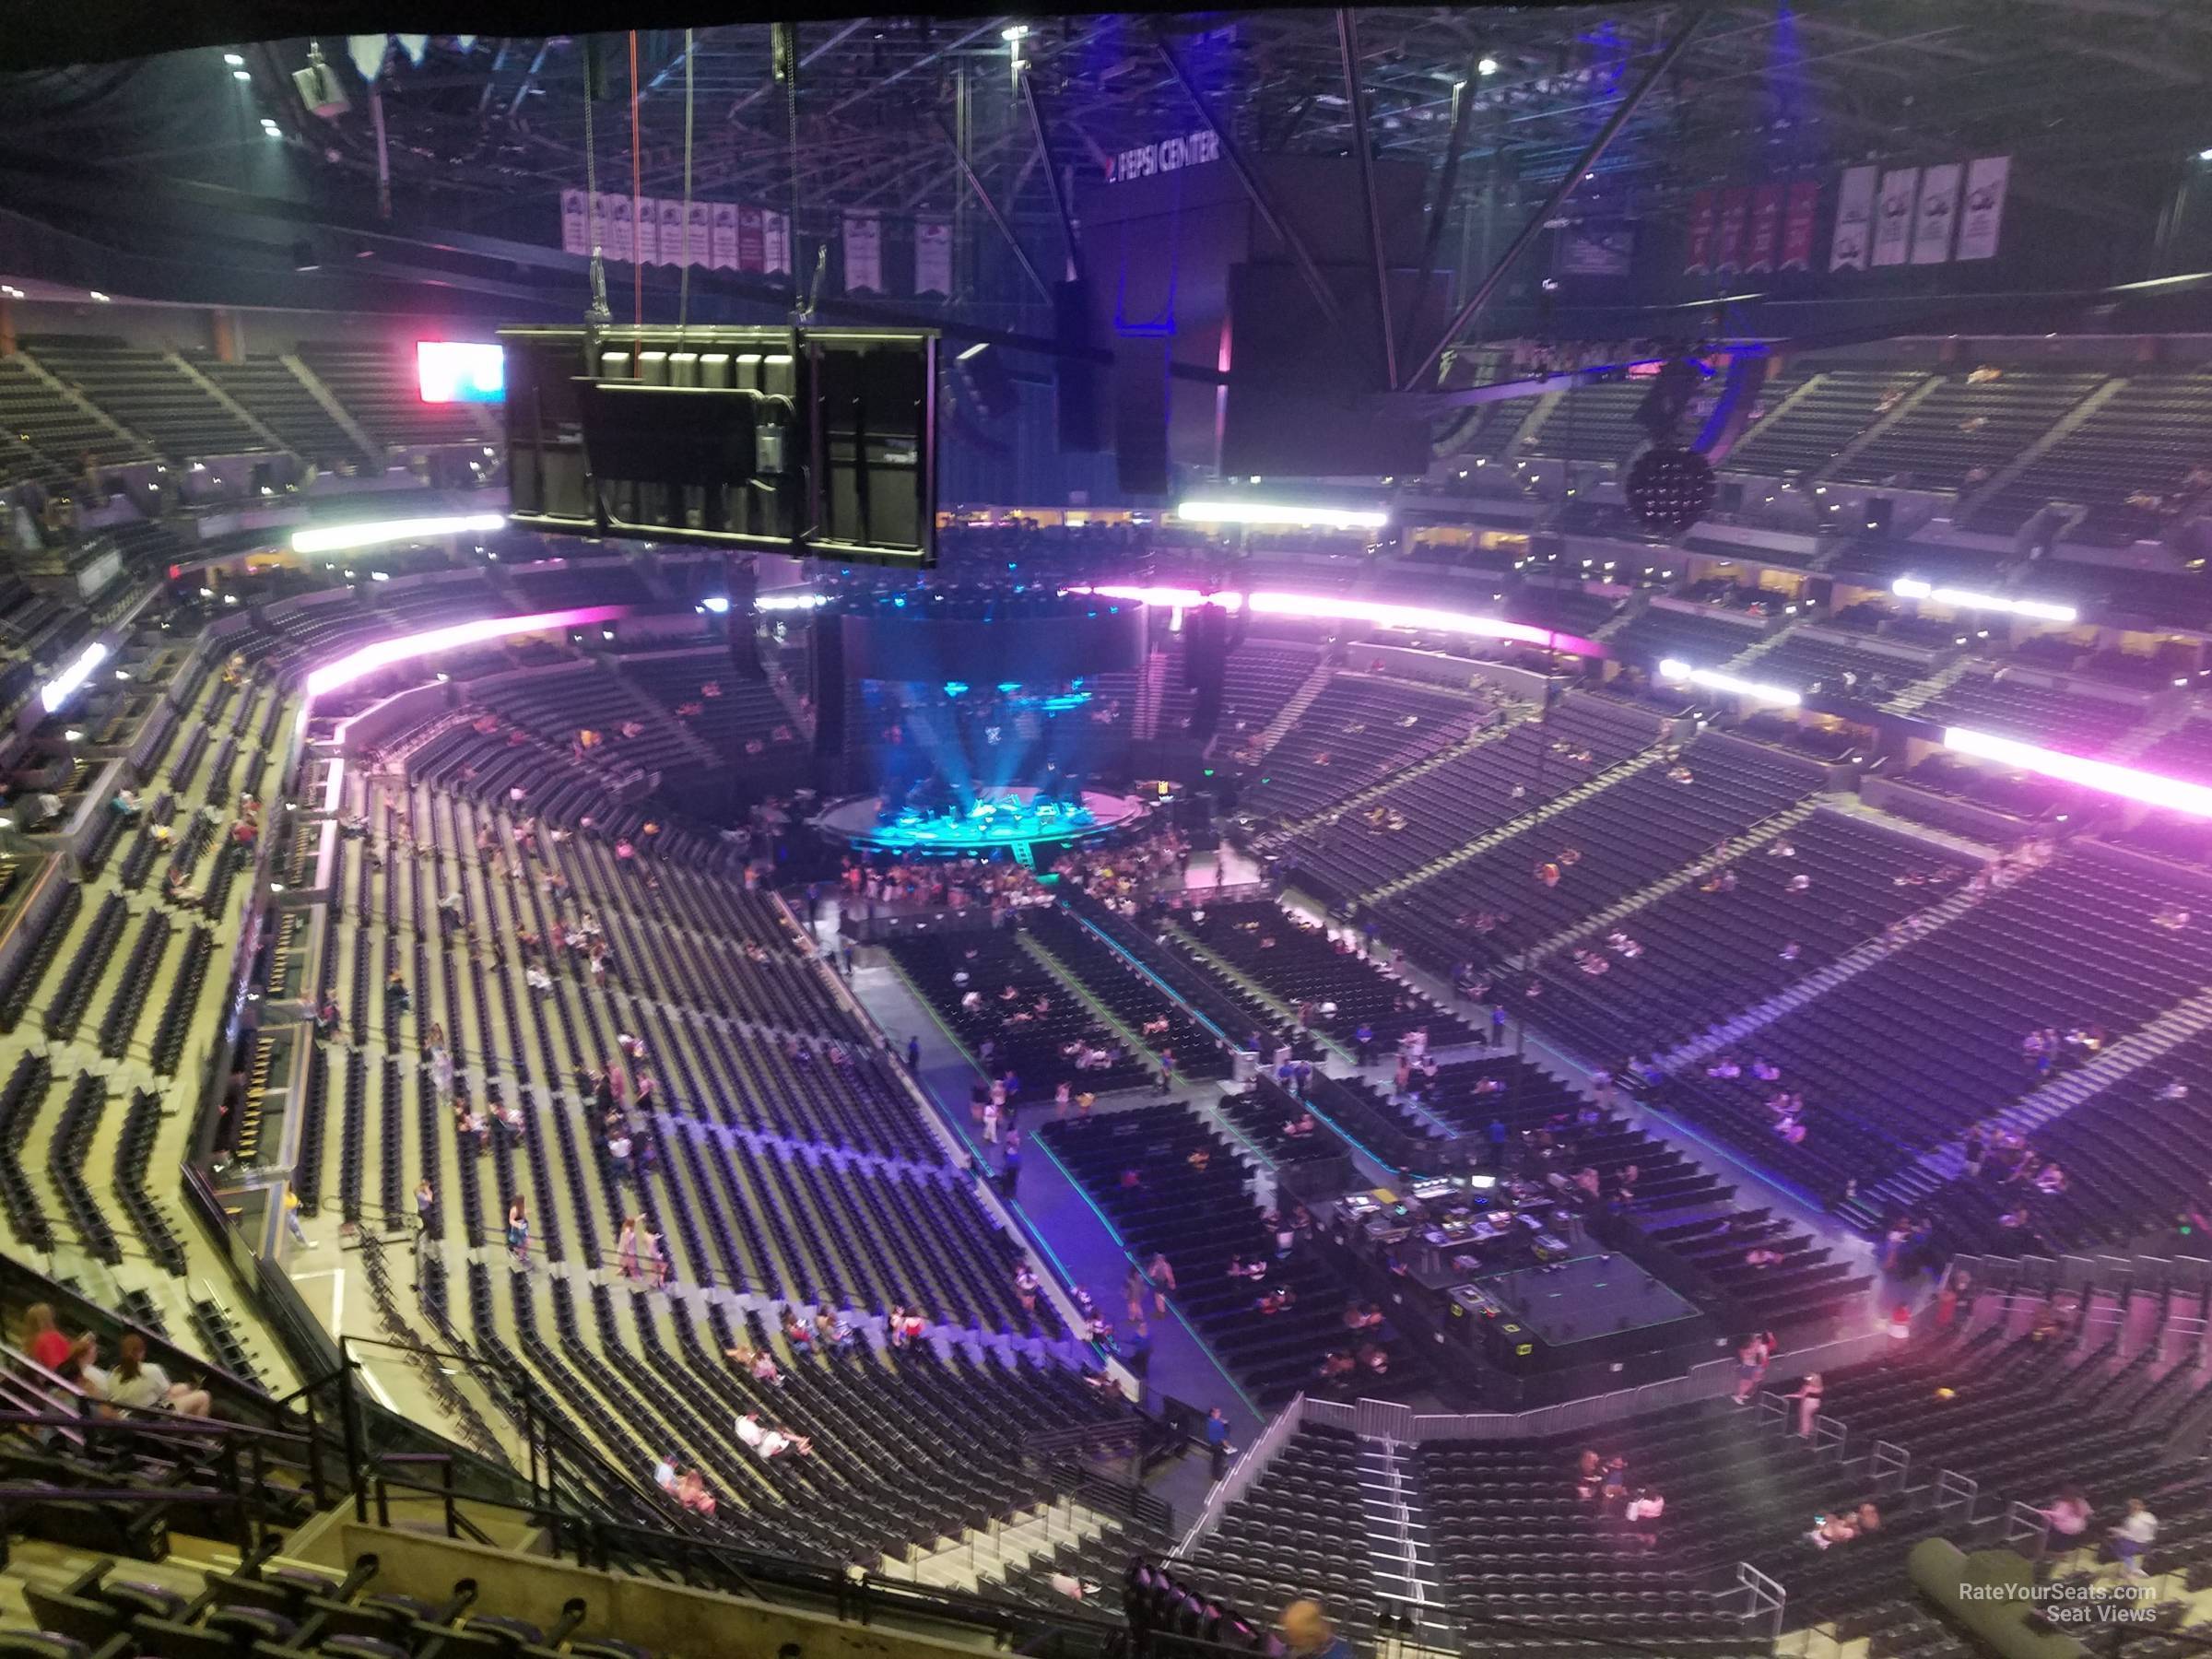 section 328, row 13 seat view  for concert - ball arena